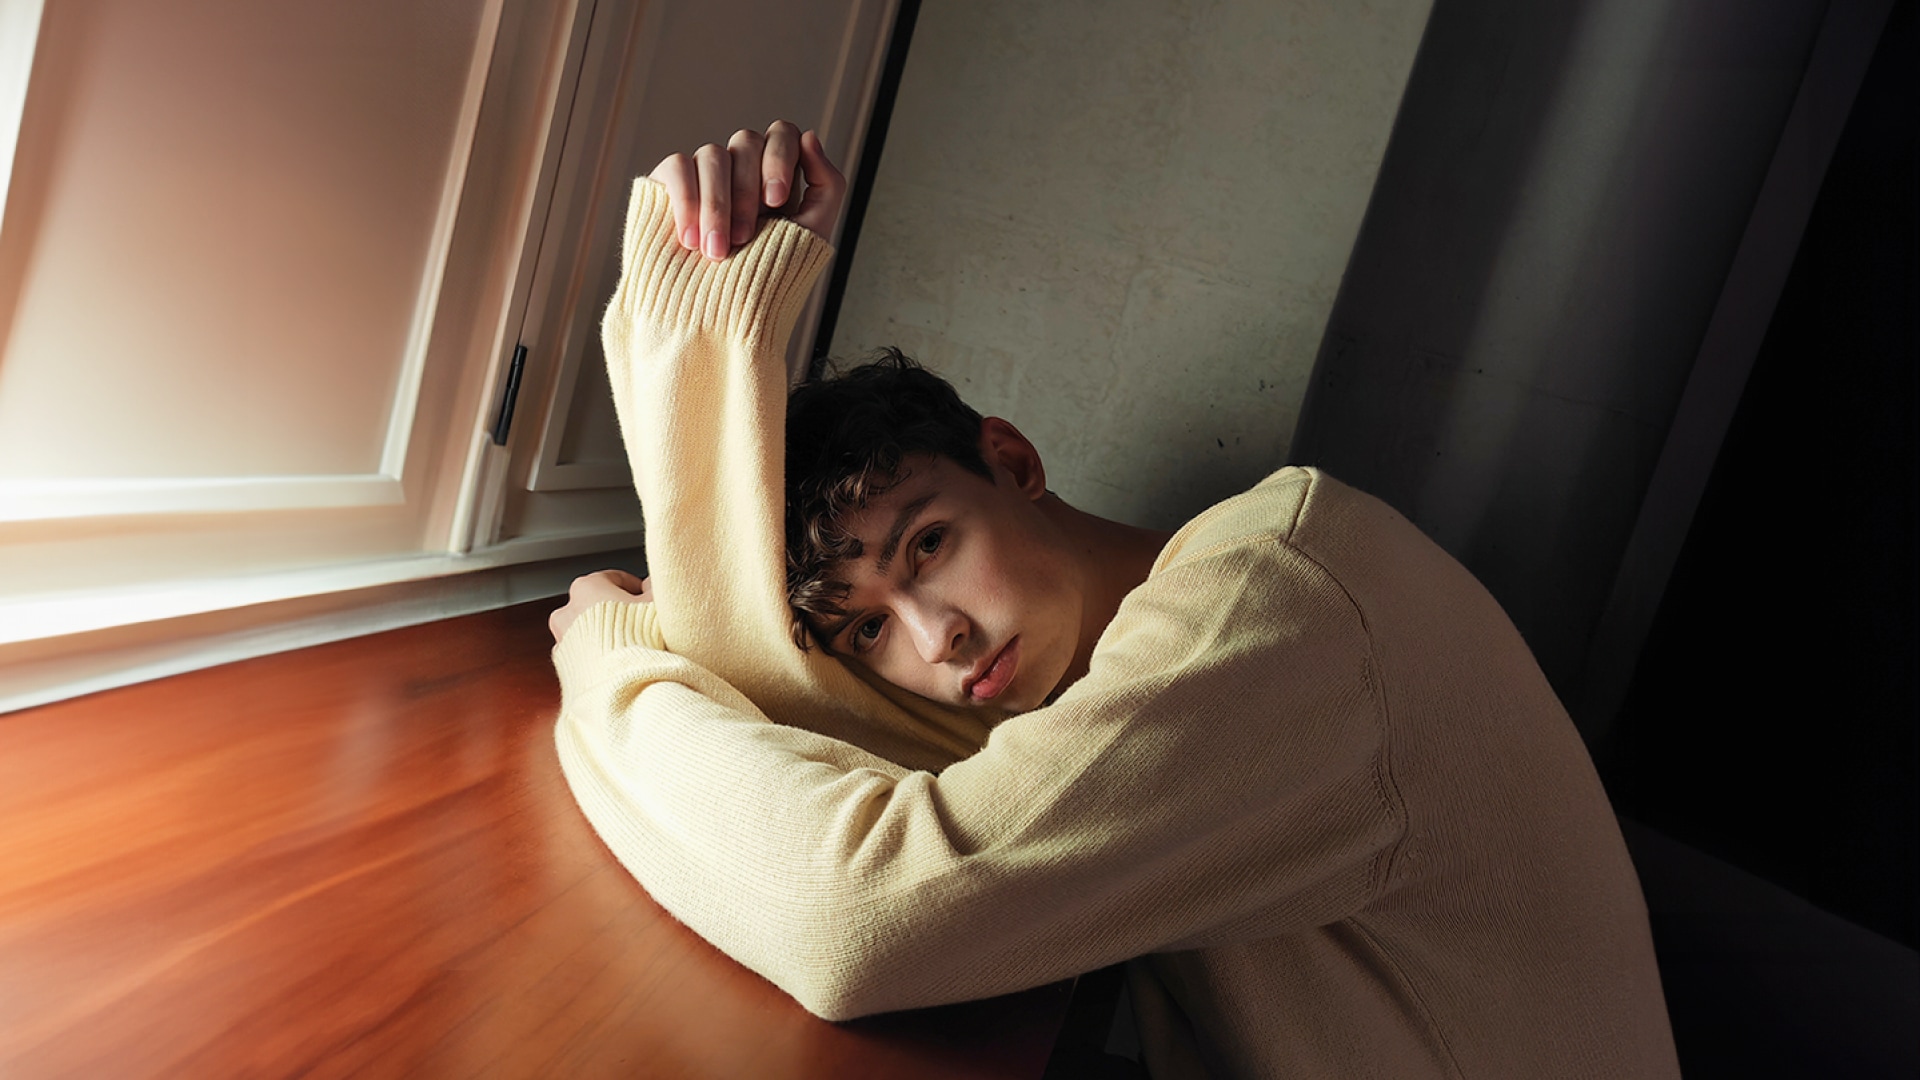 Photo of a person wearing a cream sweater, resting their head and arm on a wooden table, in a dimly lit room that only casts a faint light.